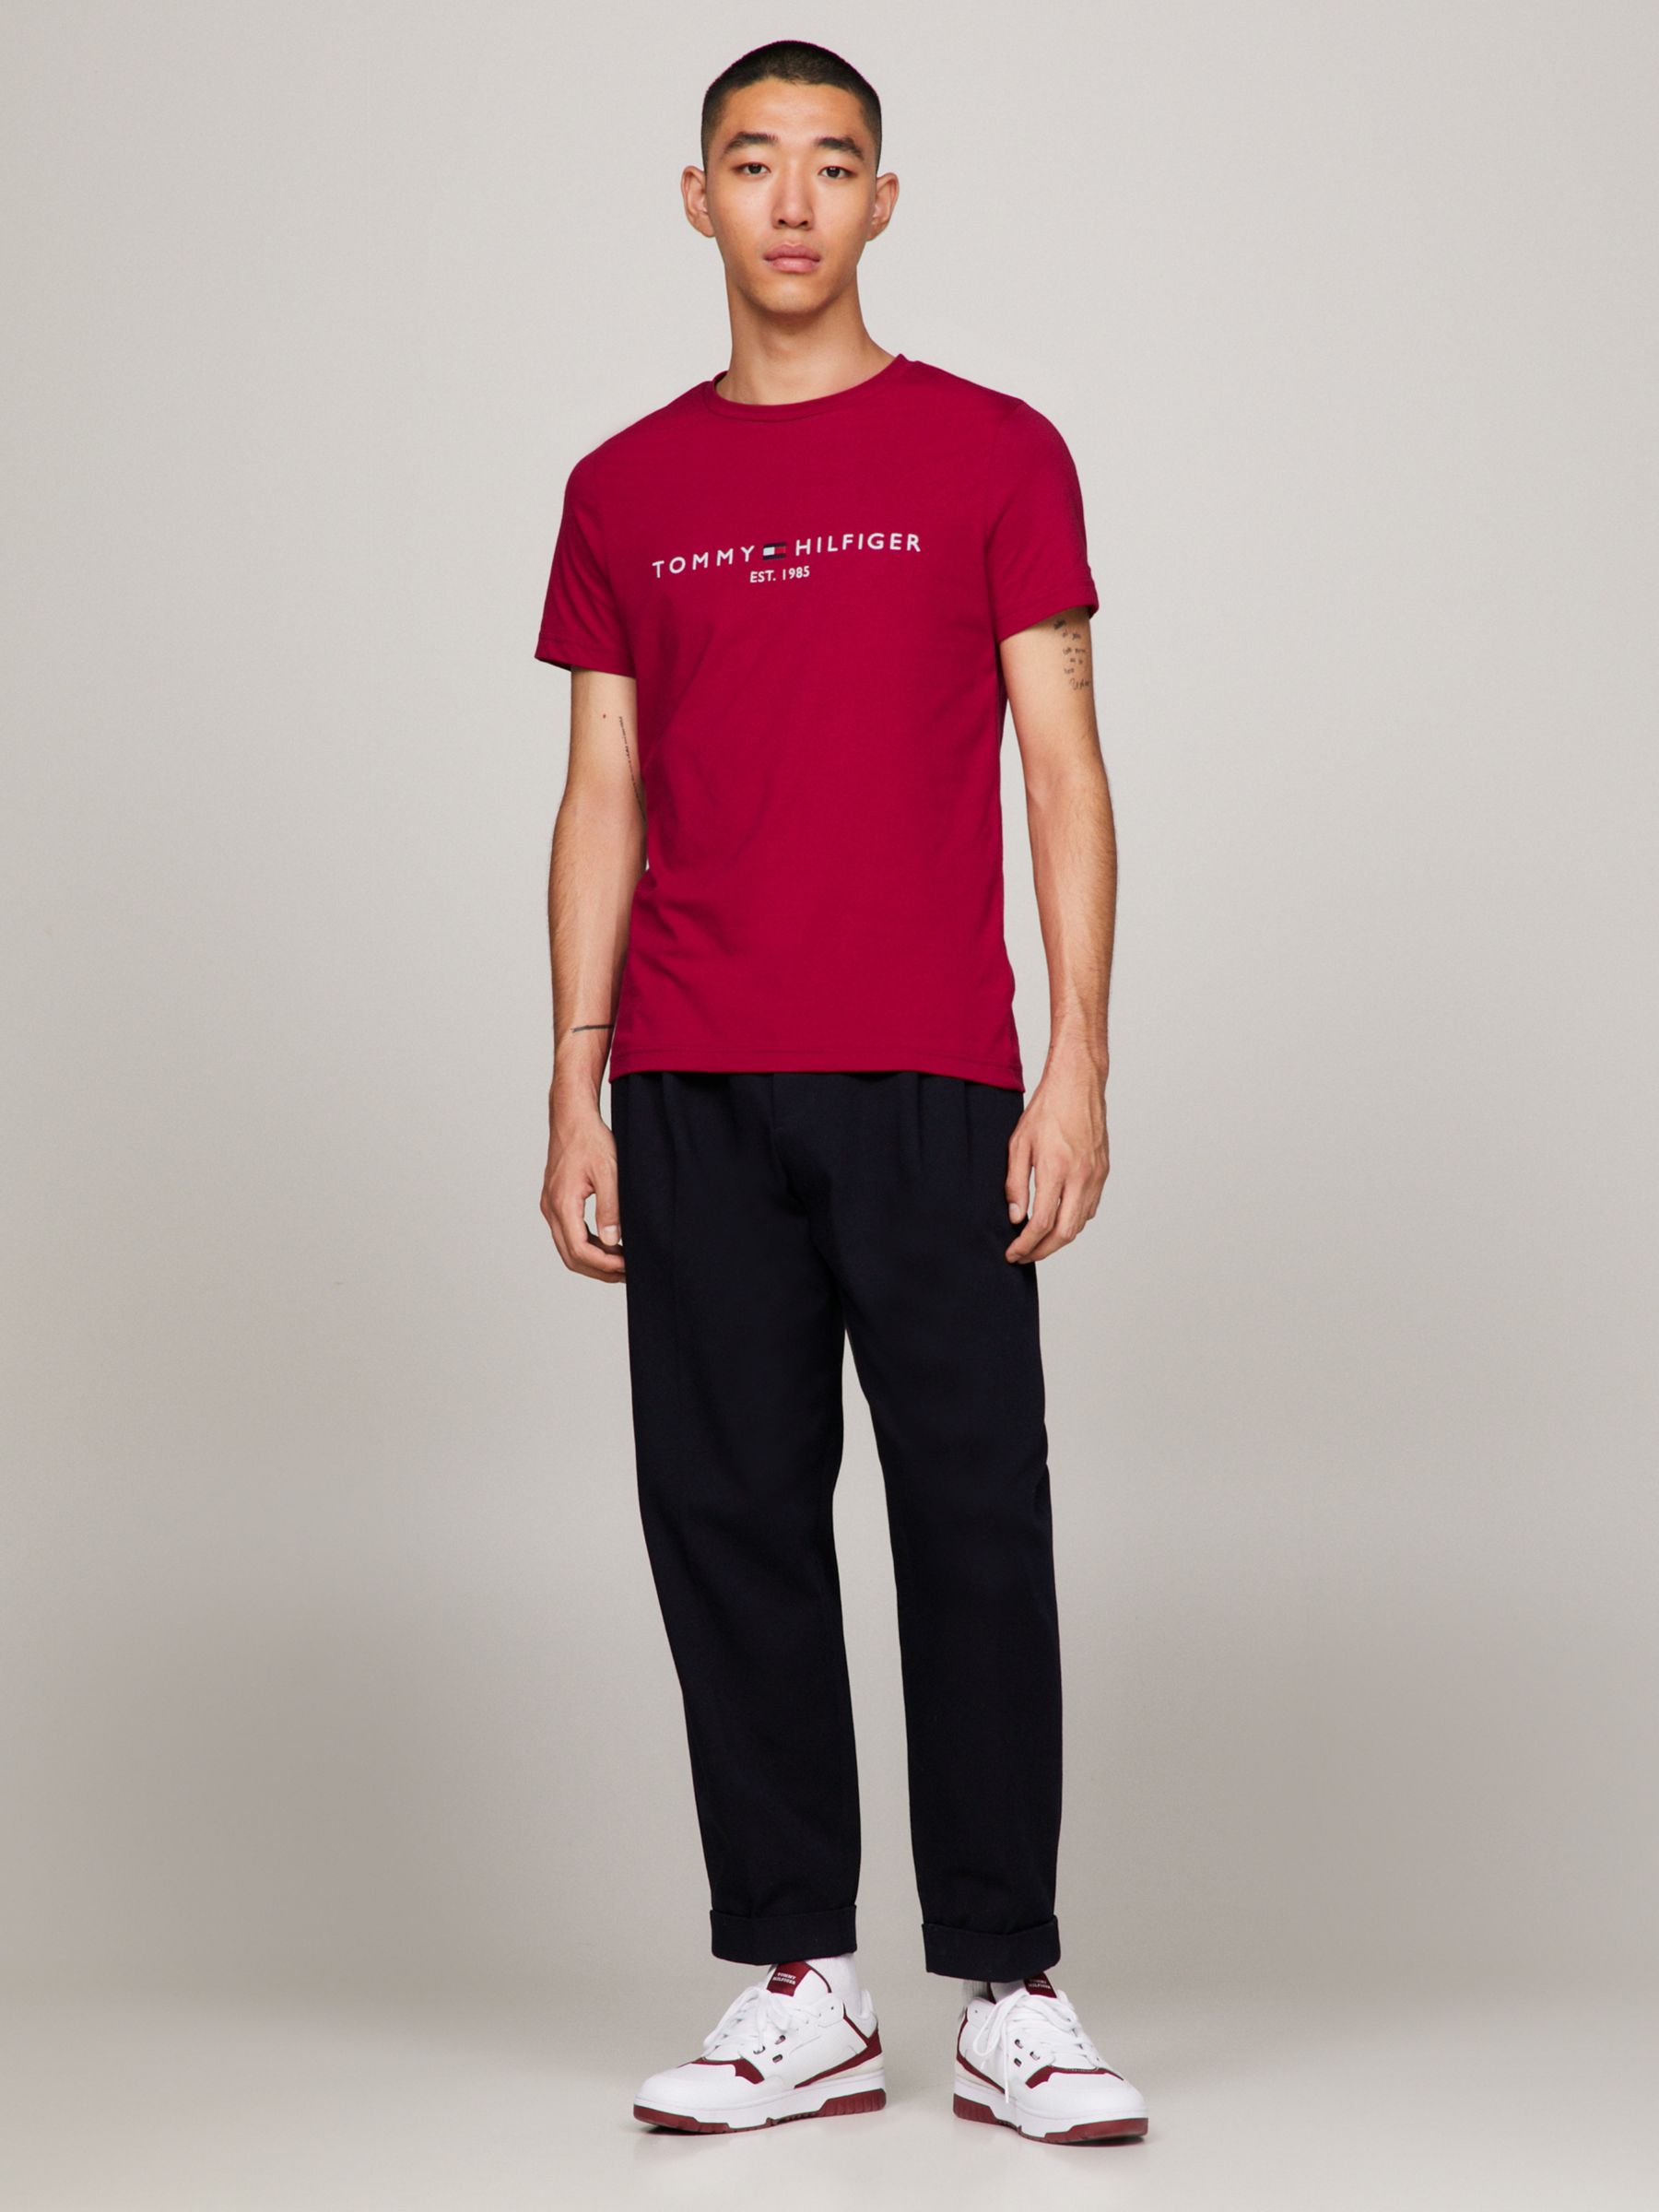 Tommy Hilfiger Tommy Logo T-Shirt, Royal Berry at John Lewis & Partners